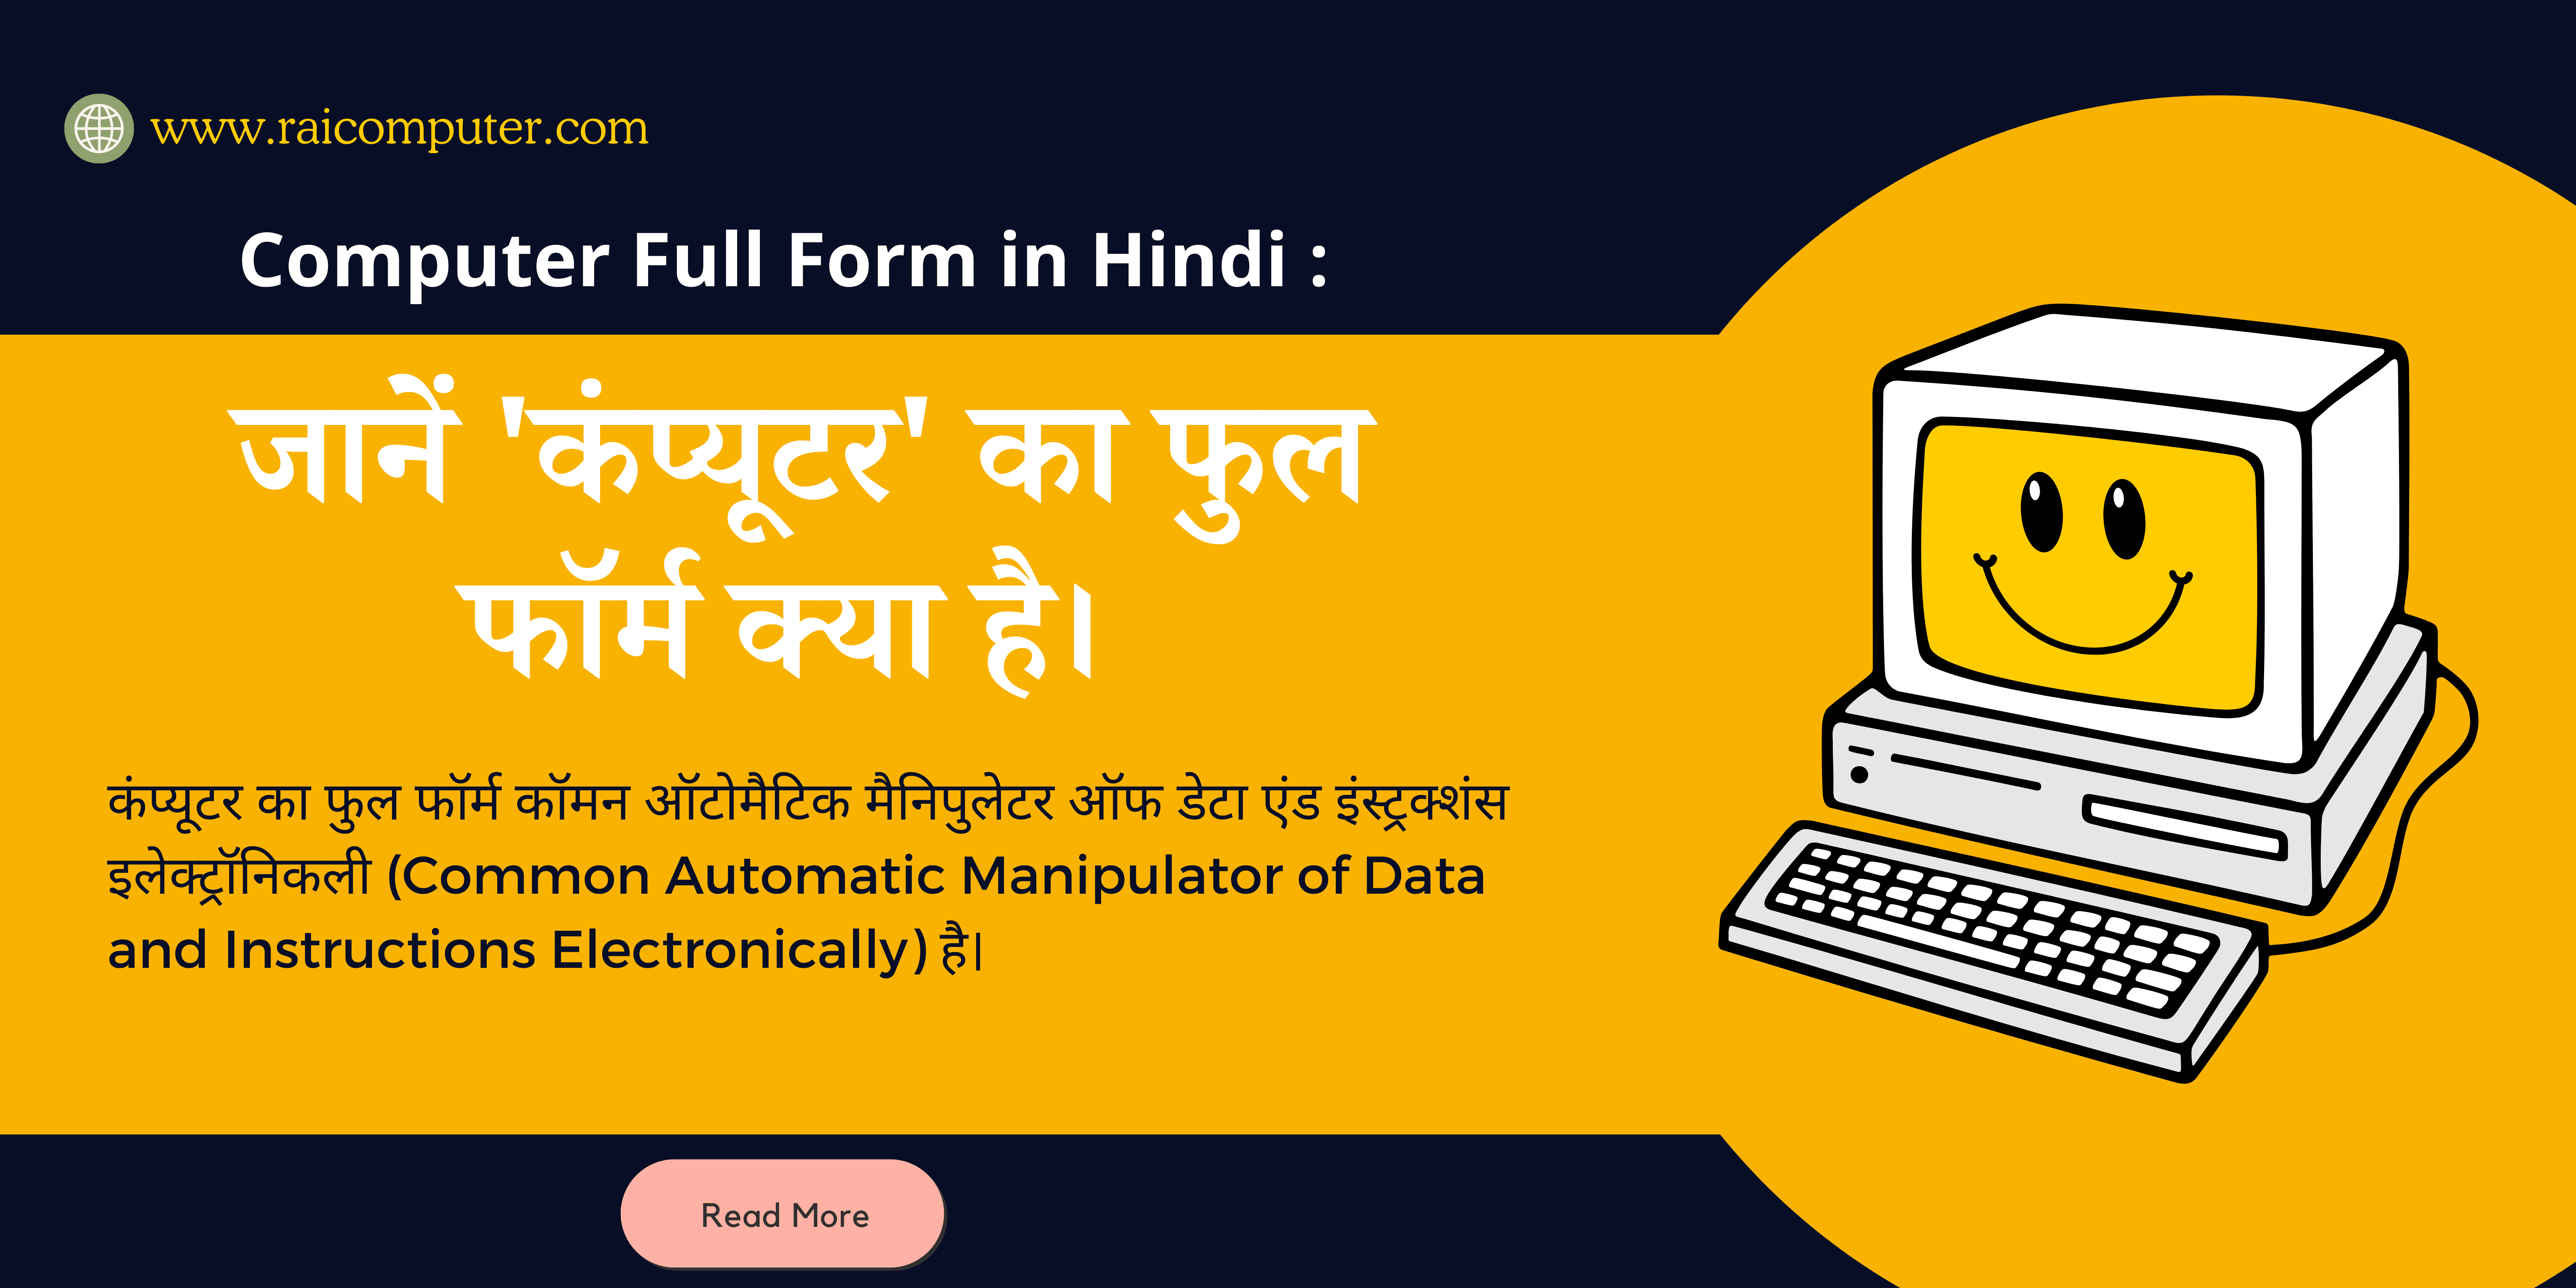 Computer Full Form in Hindi